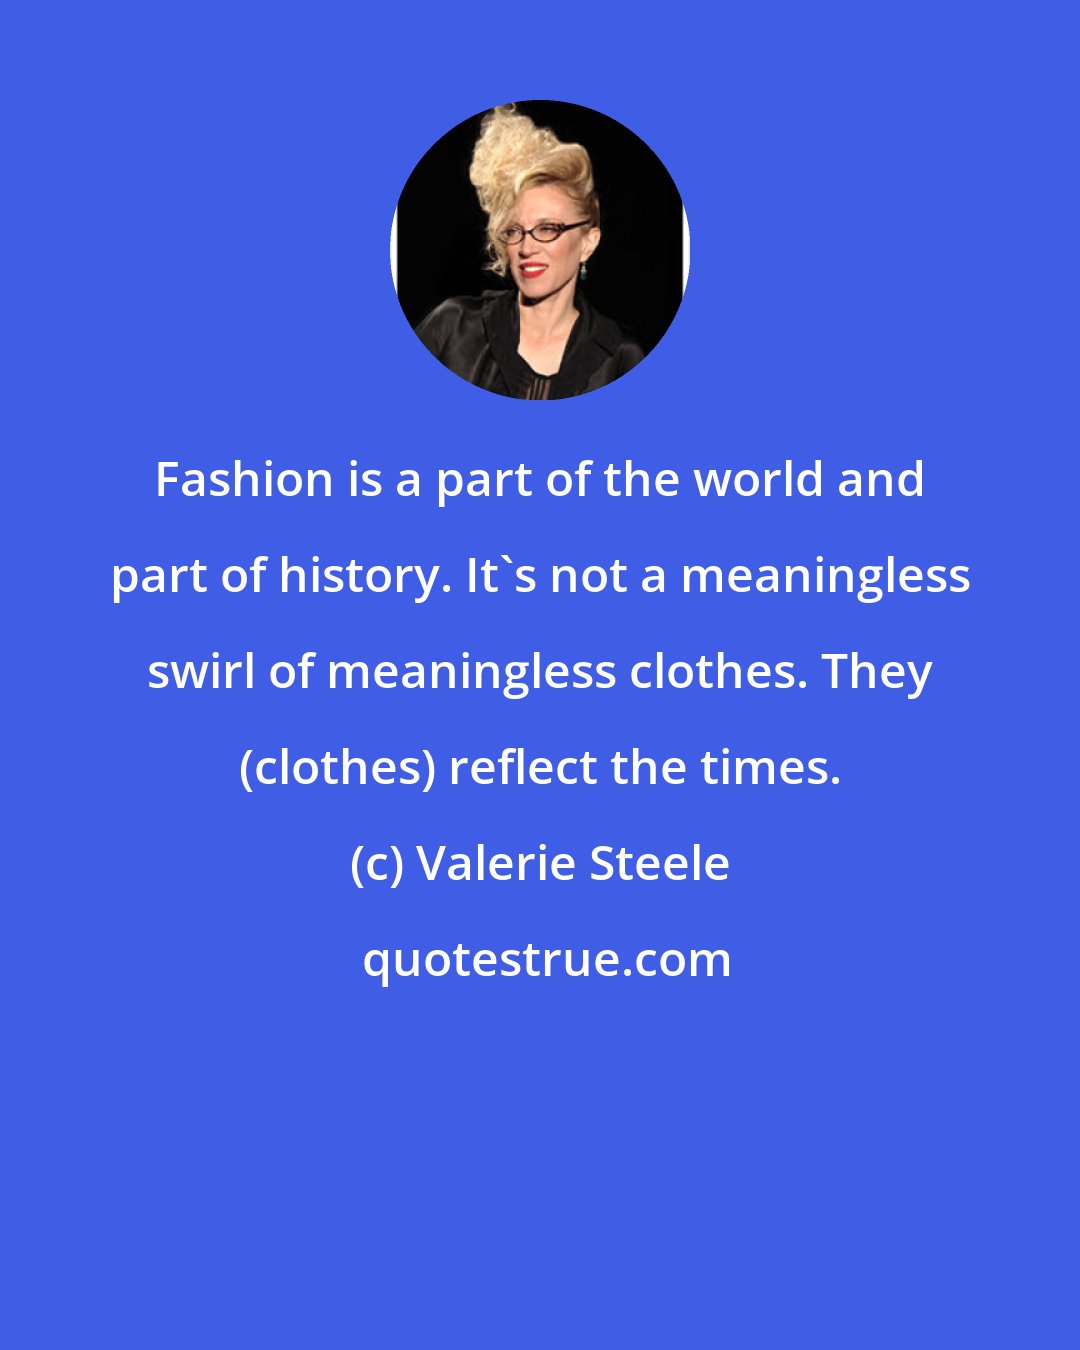 Valerie Steele: Fashion is a part of the world and part of history. It's not a meaningless swirl of meaningless clothes. They (clothes) reflect the times.